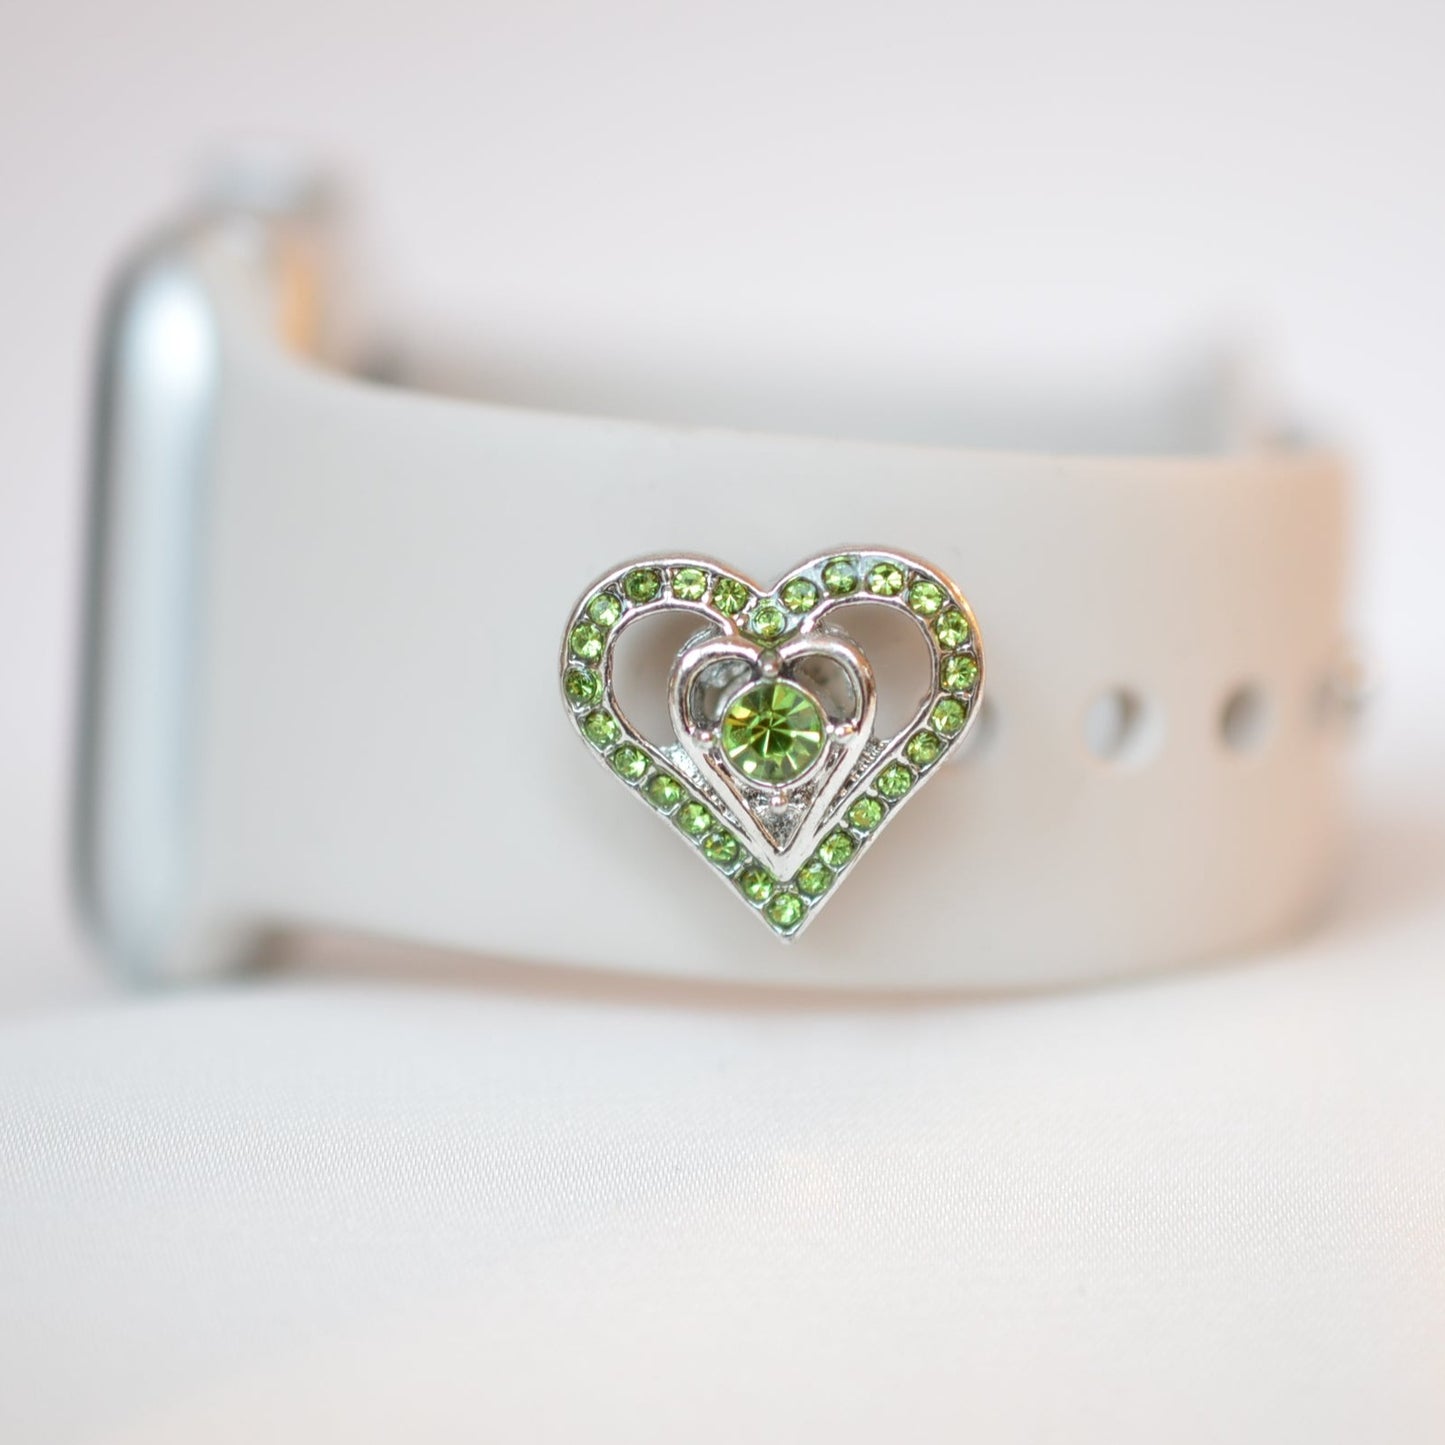 Green Heart Charm for Belts, Bags and Watch Bands